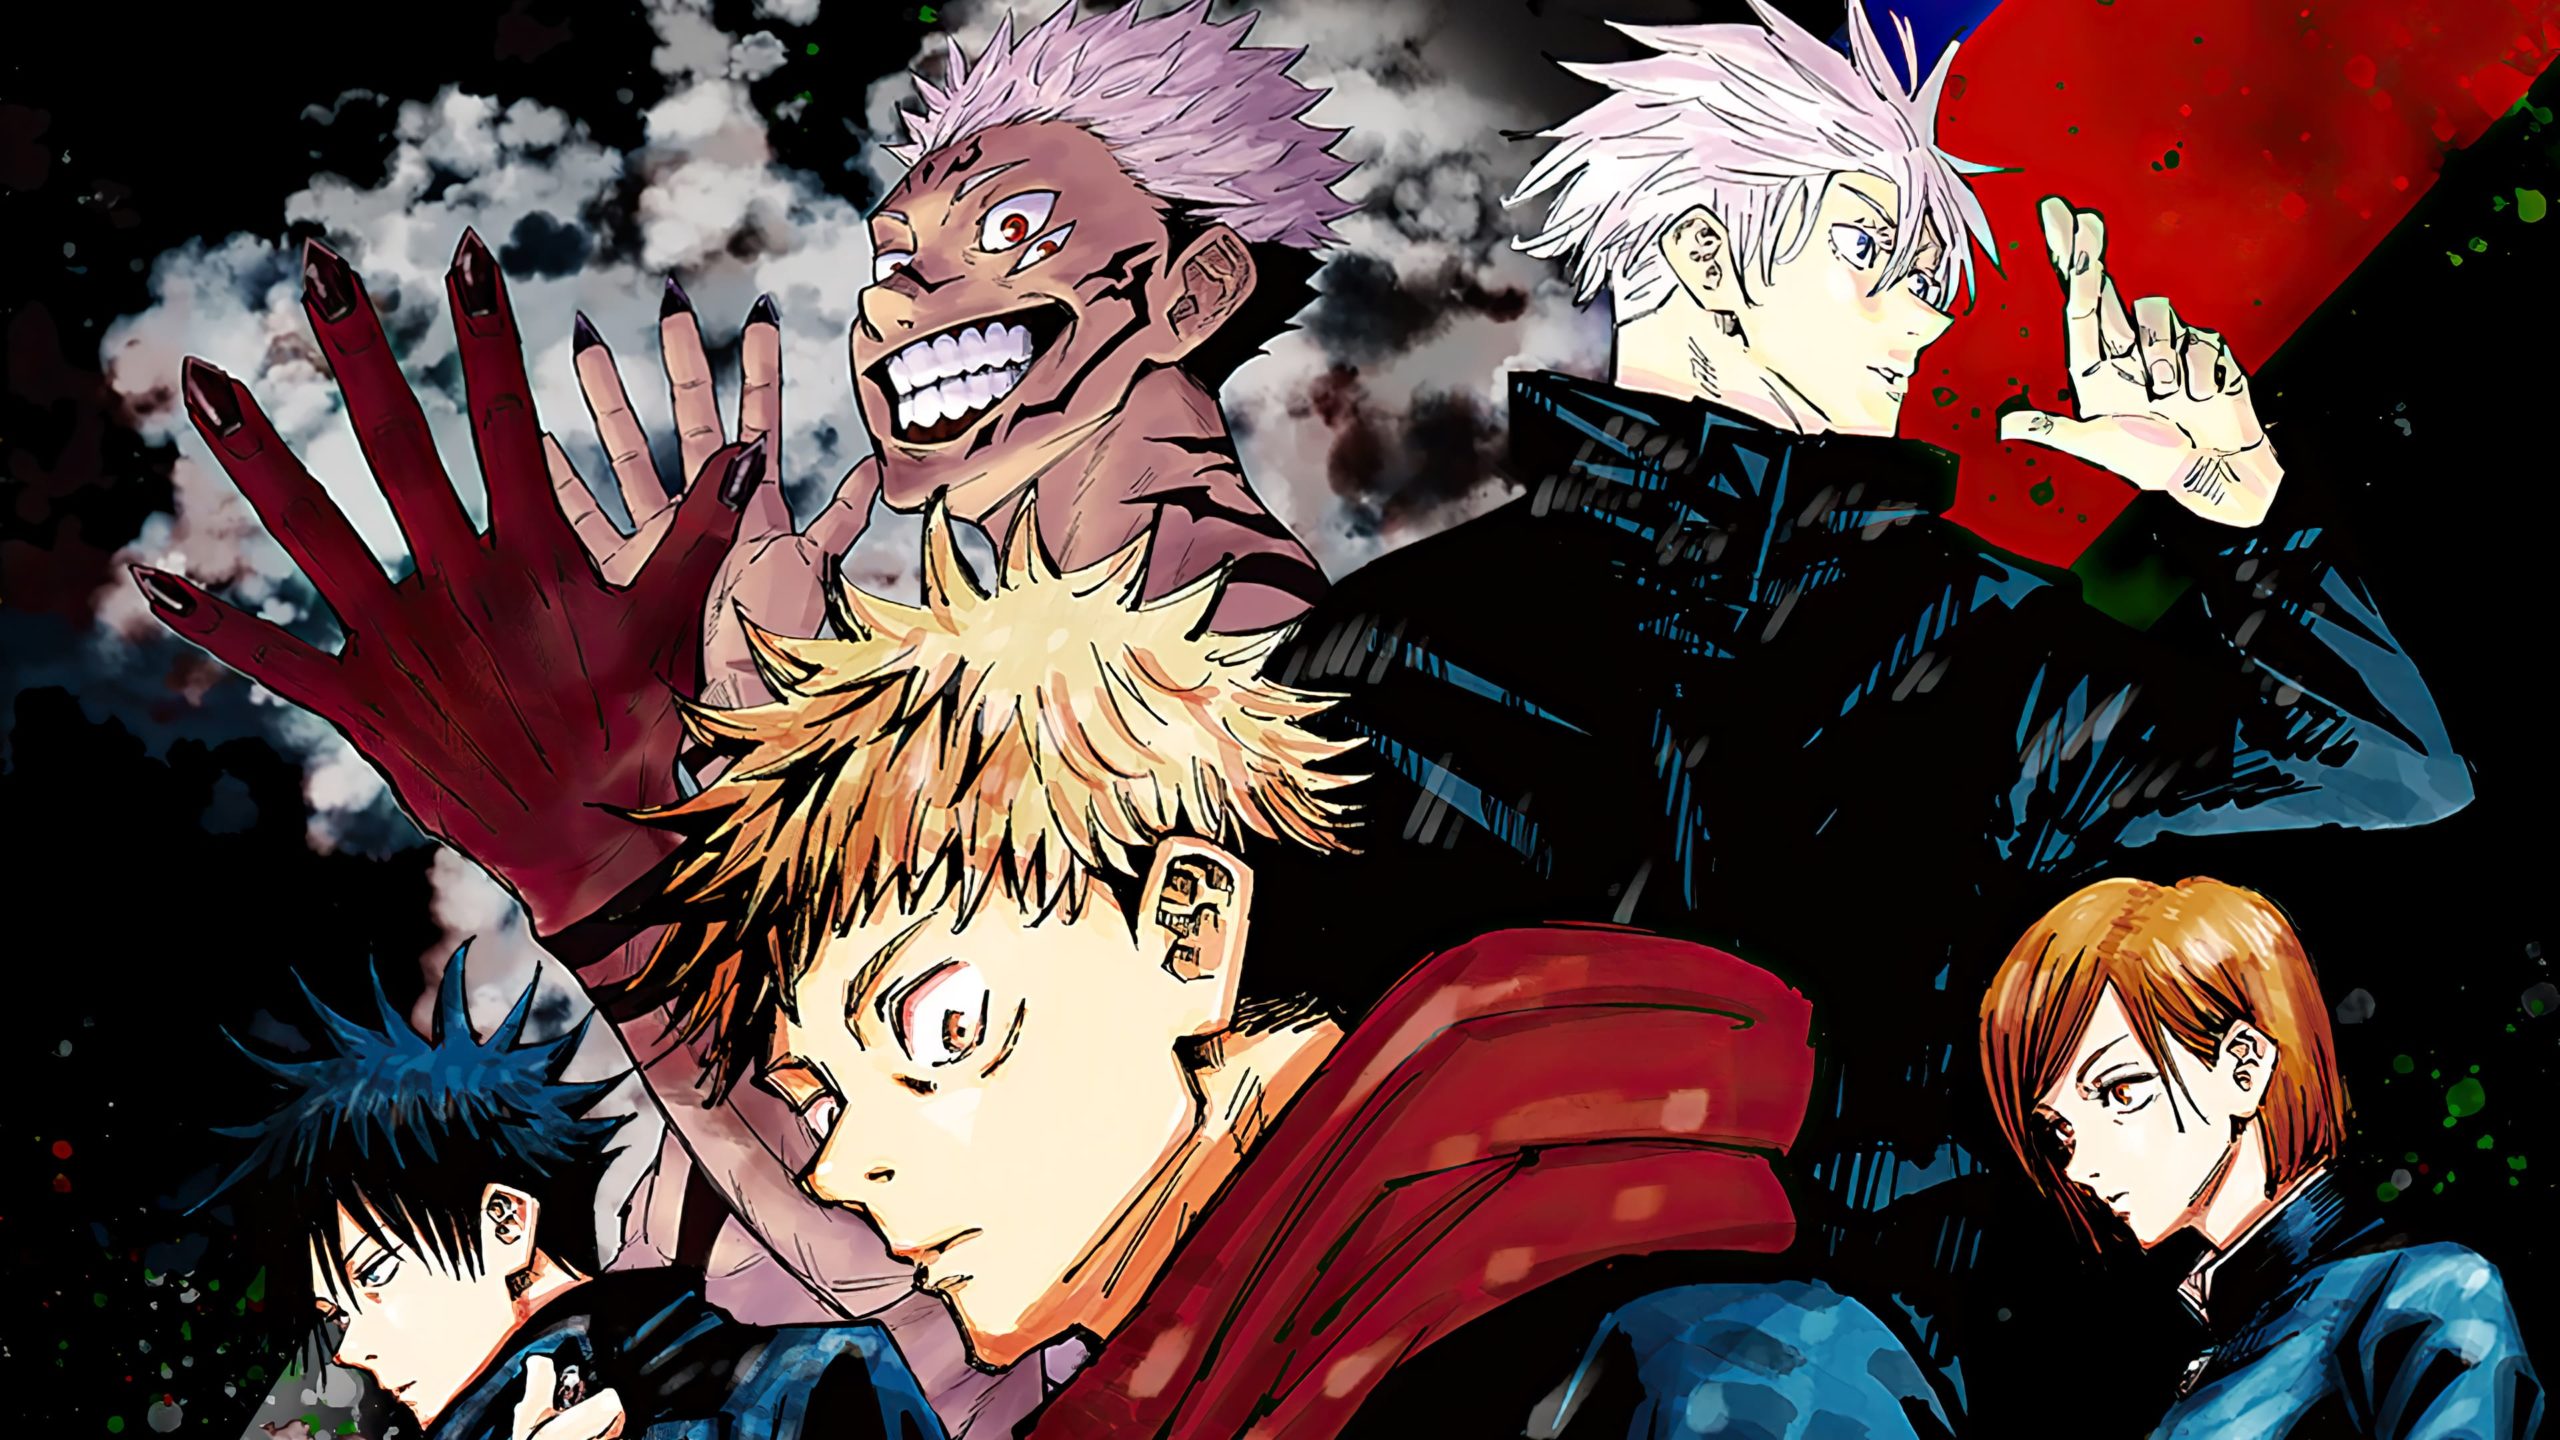 Jujutsu Kaisen Chapter 129 Read Online, Spoilers, Raw Scans Leaks and Manga Summary